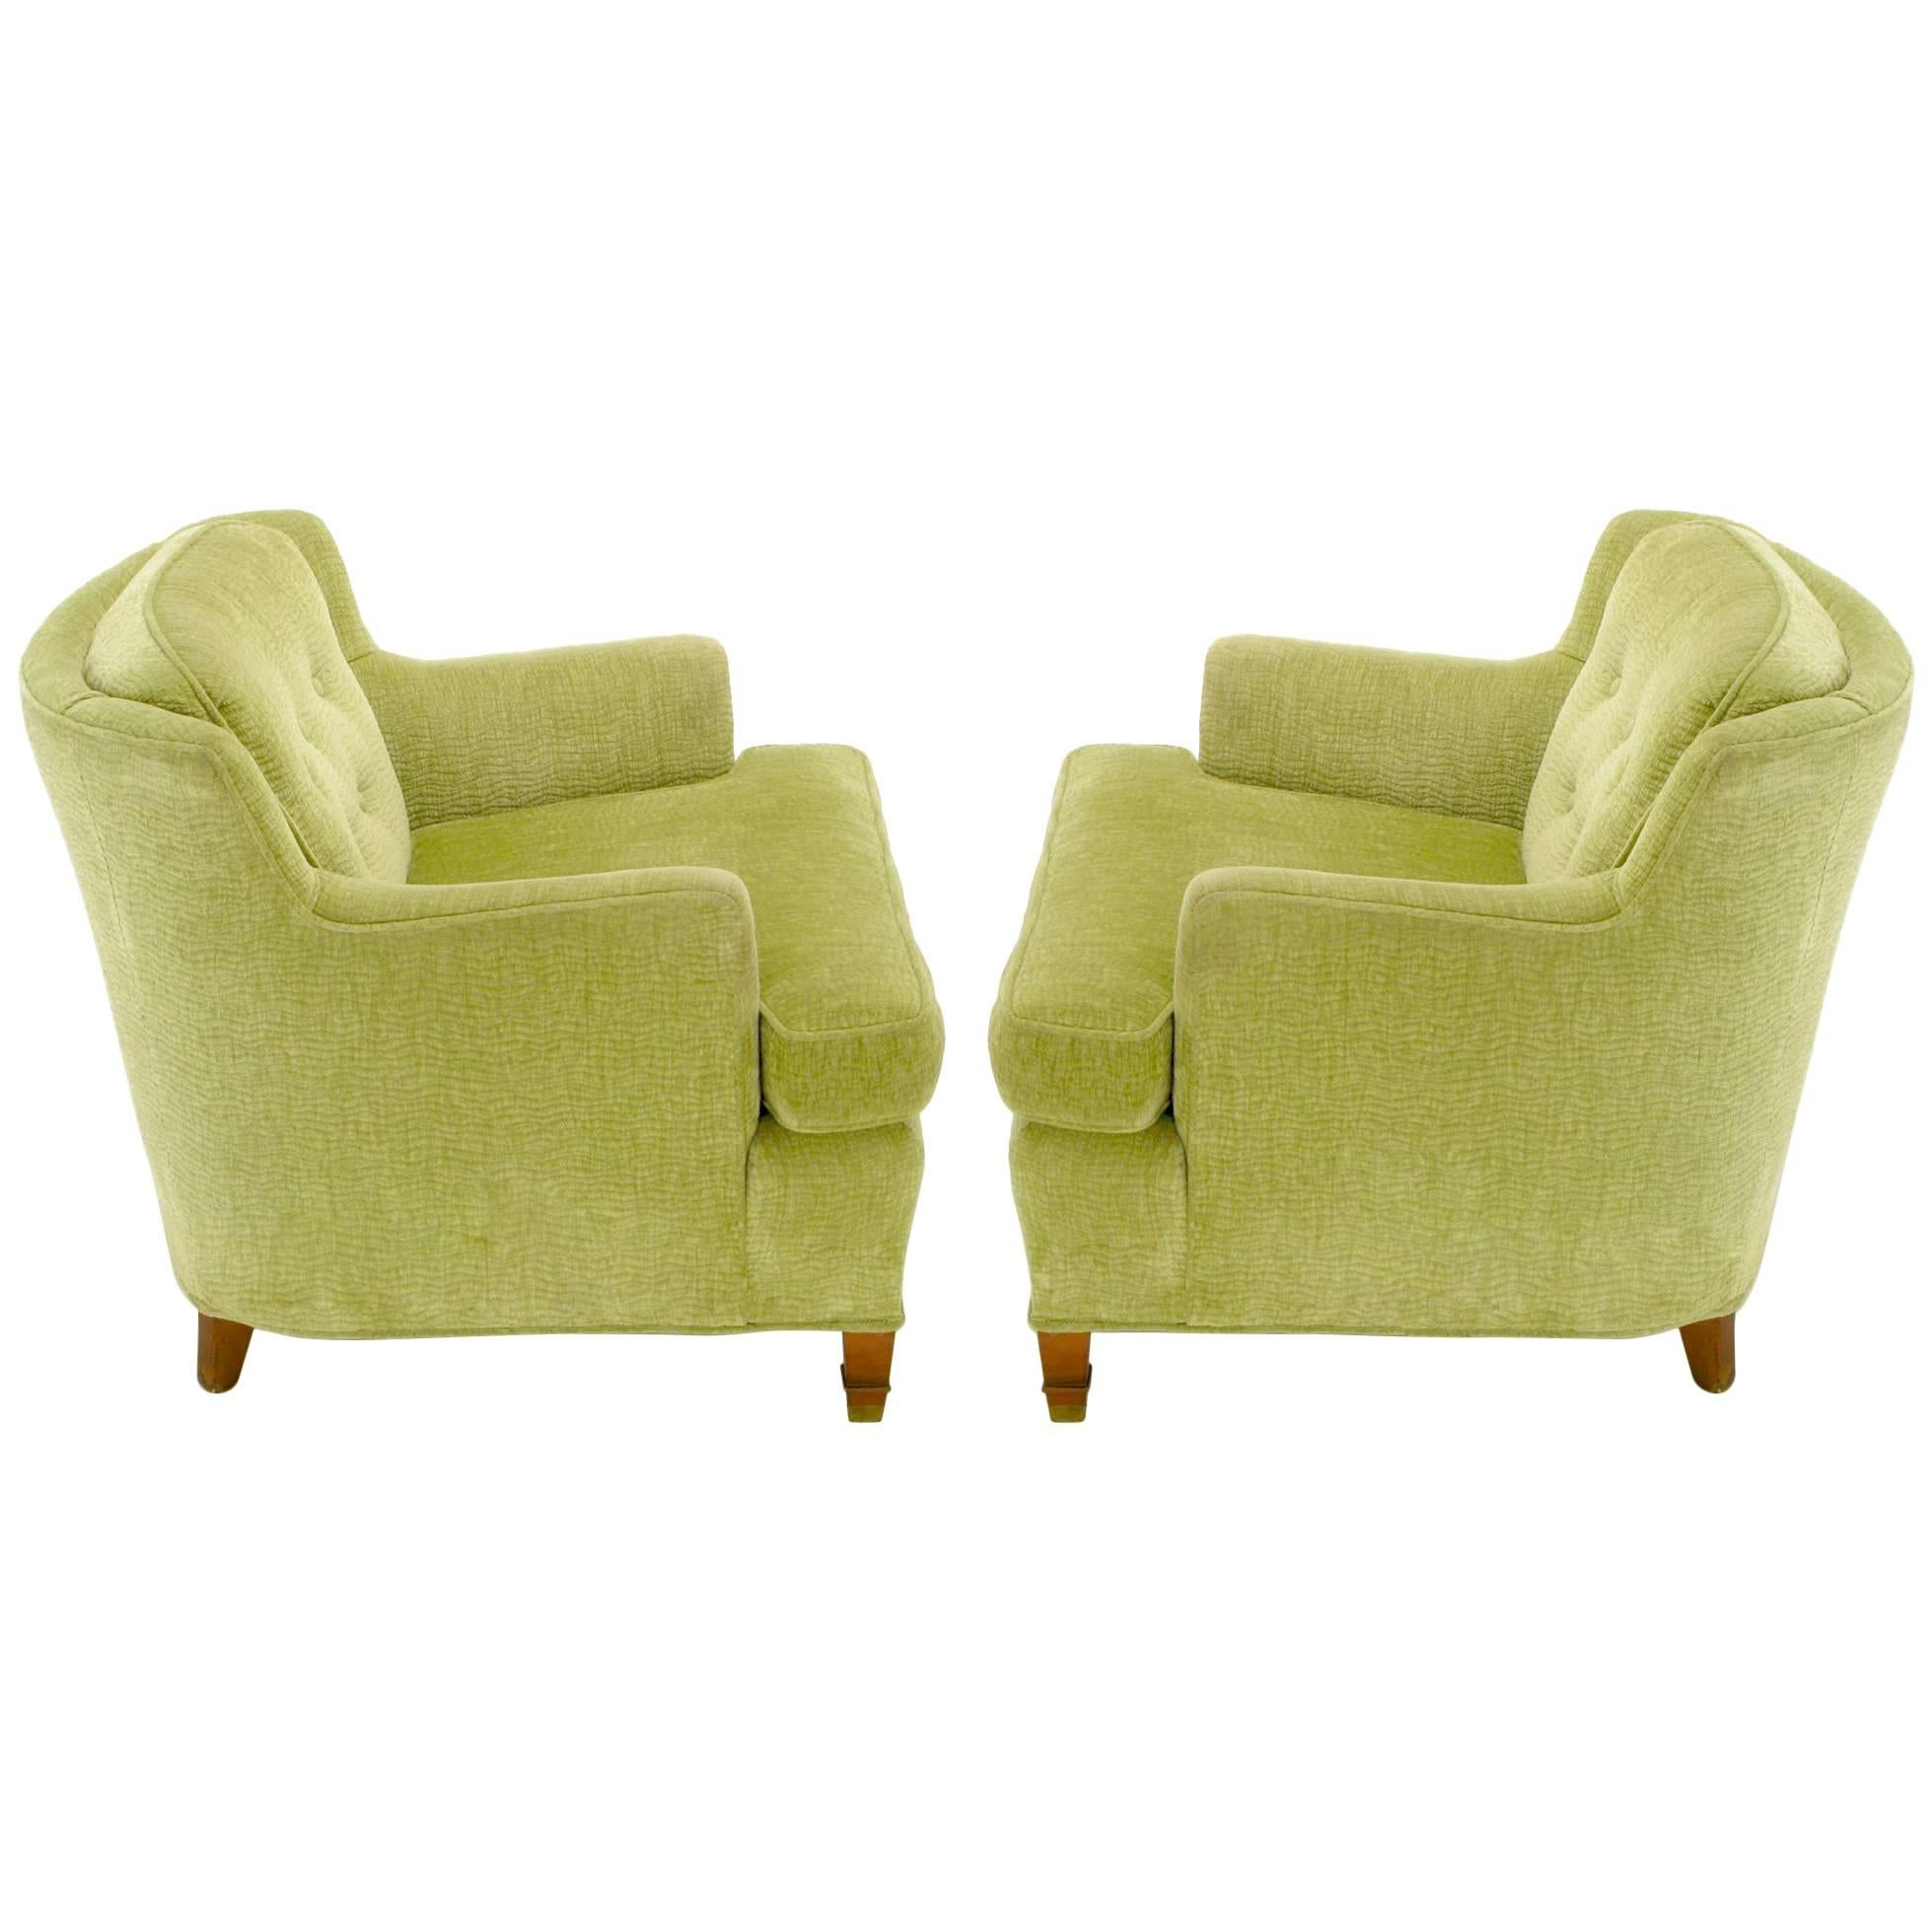 Pair of Pistachio Green Chenille Button-Tufted Low Barrel Back Wing Chairs